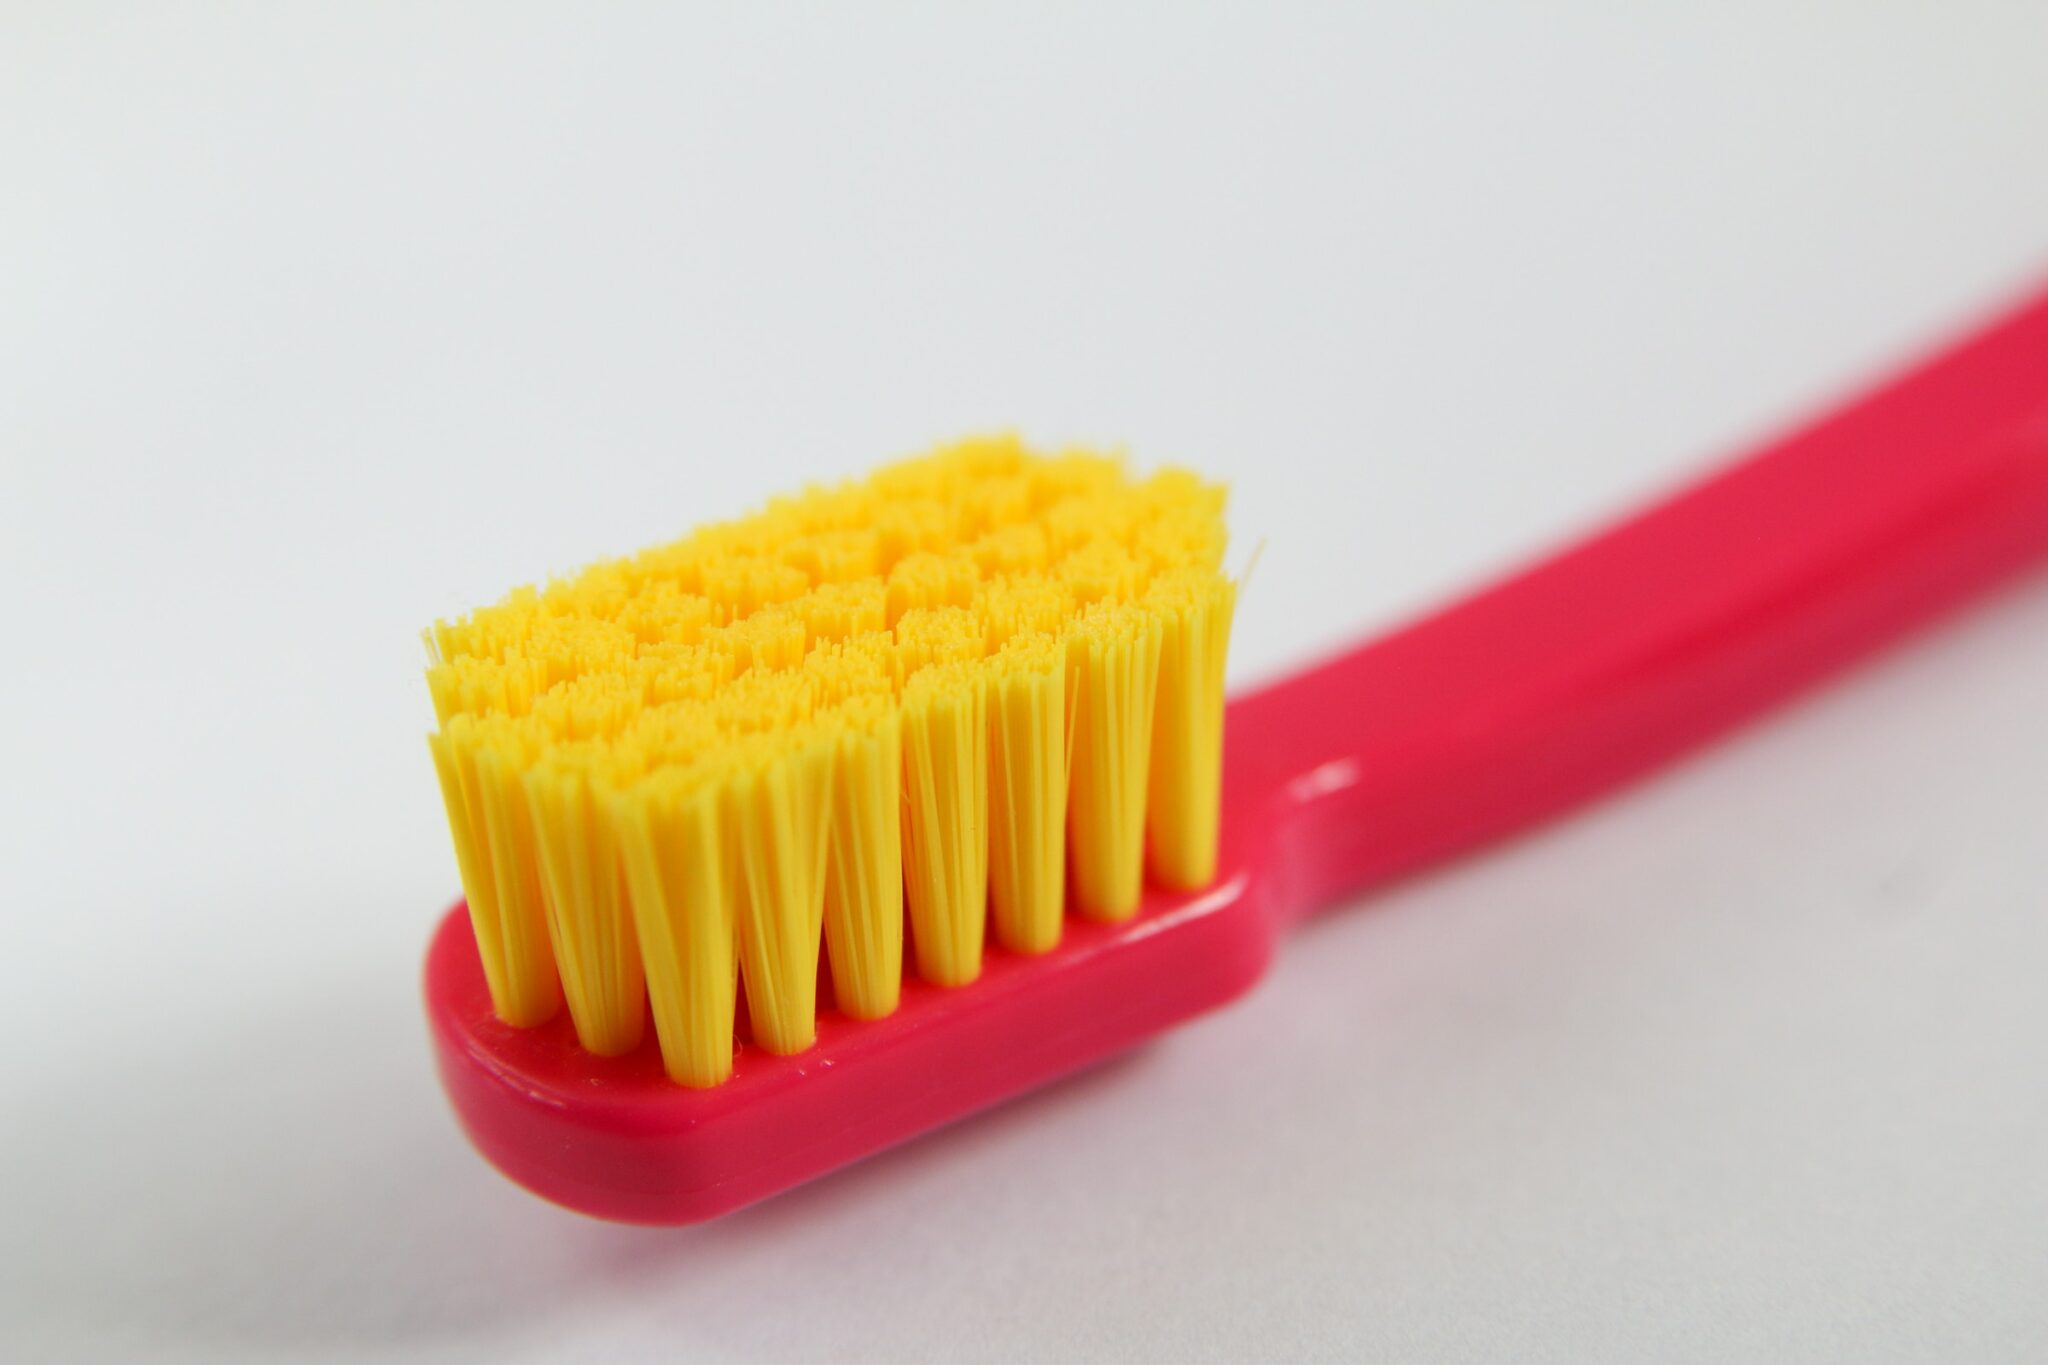 Red toothbrush with yellow bristles